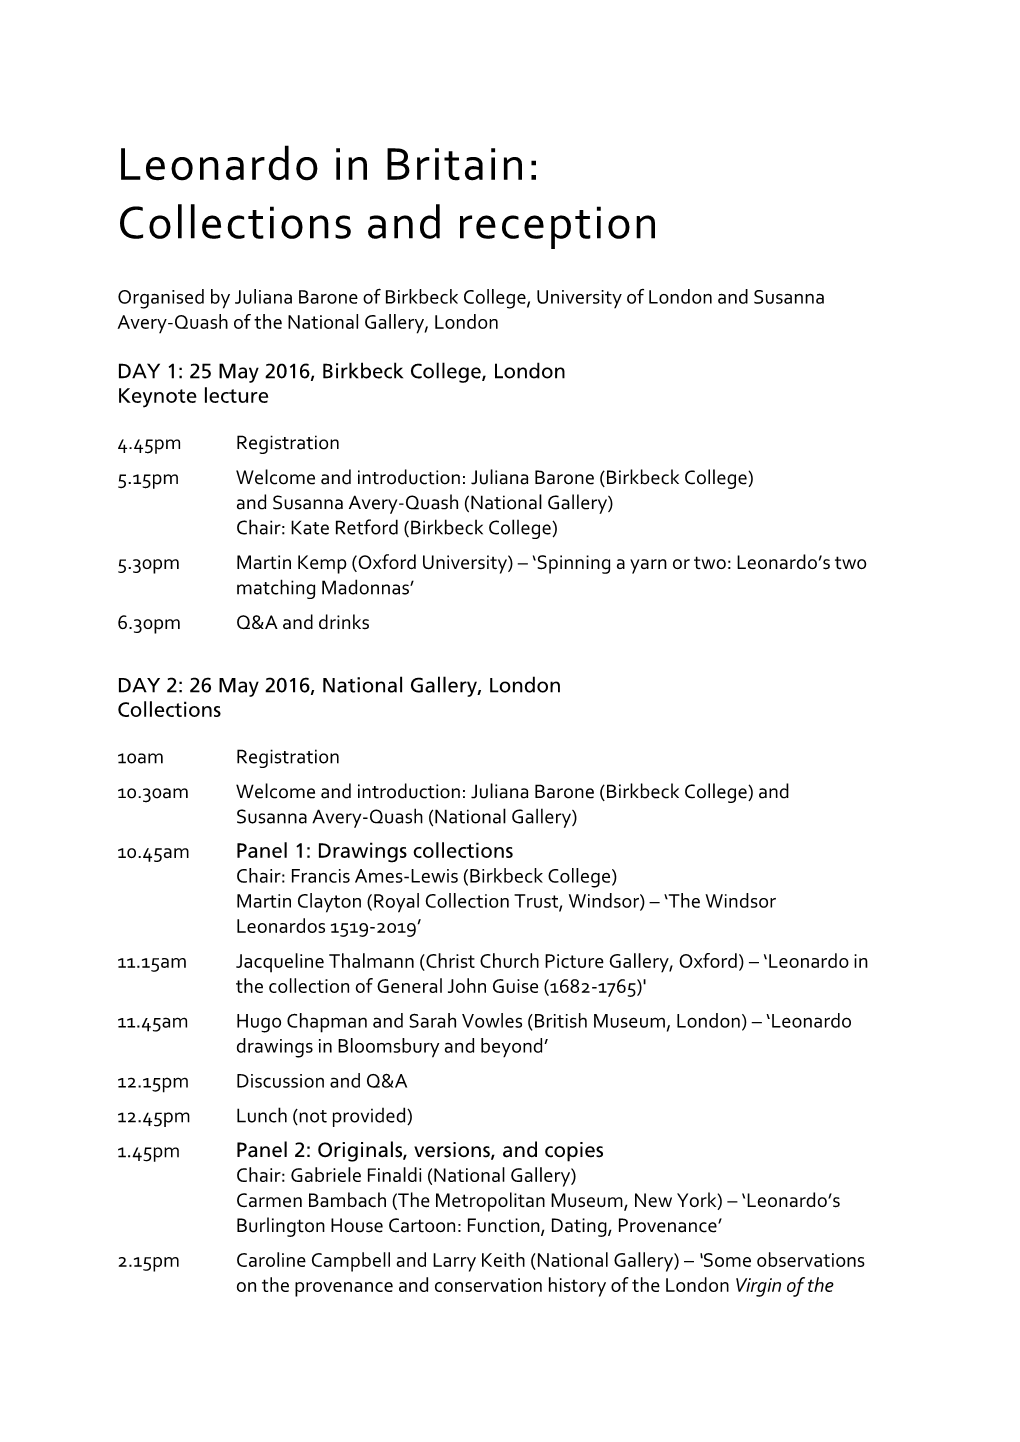 Conference Programme for 'Leonardo in Britain: Collections and Reception'